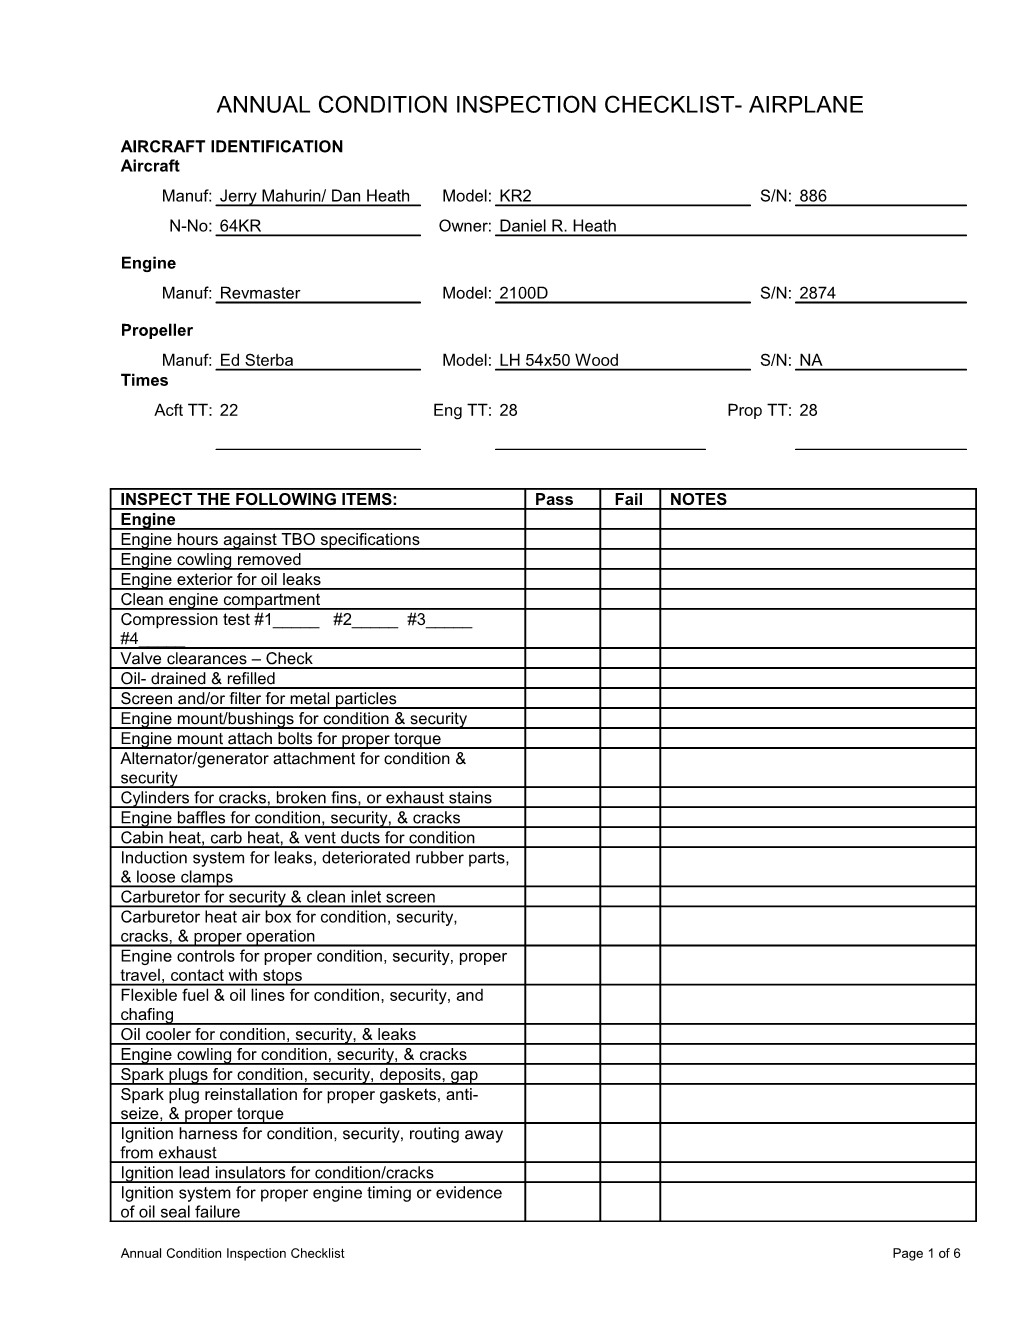 Annual Condition Inspection Checklist- Airplane